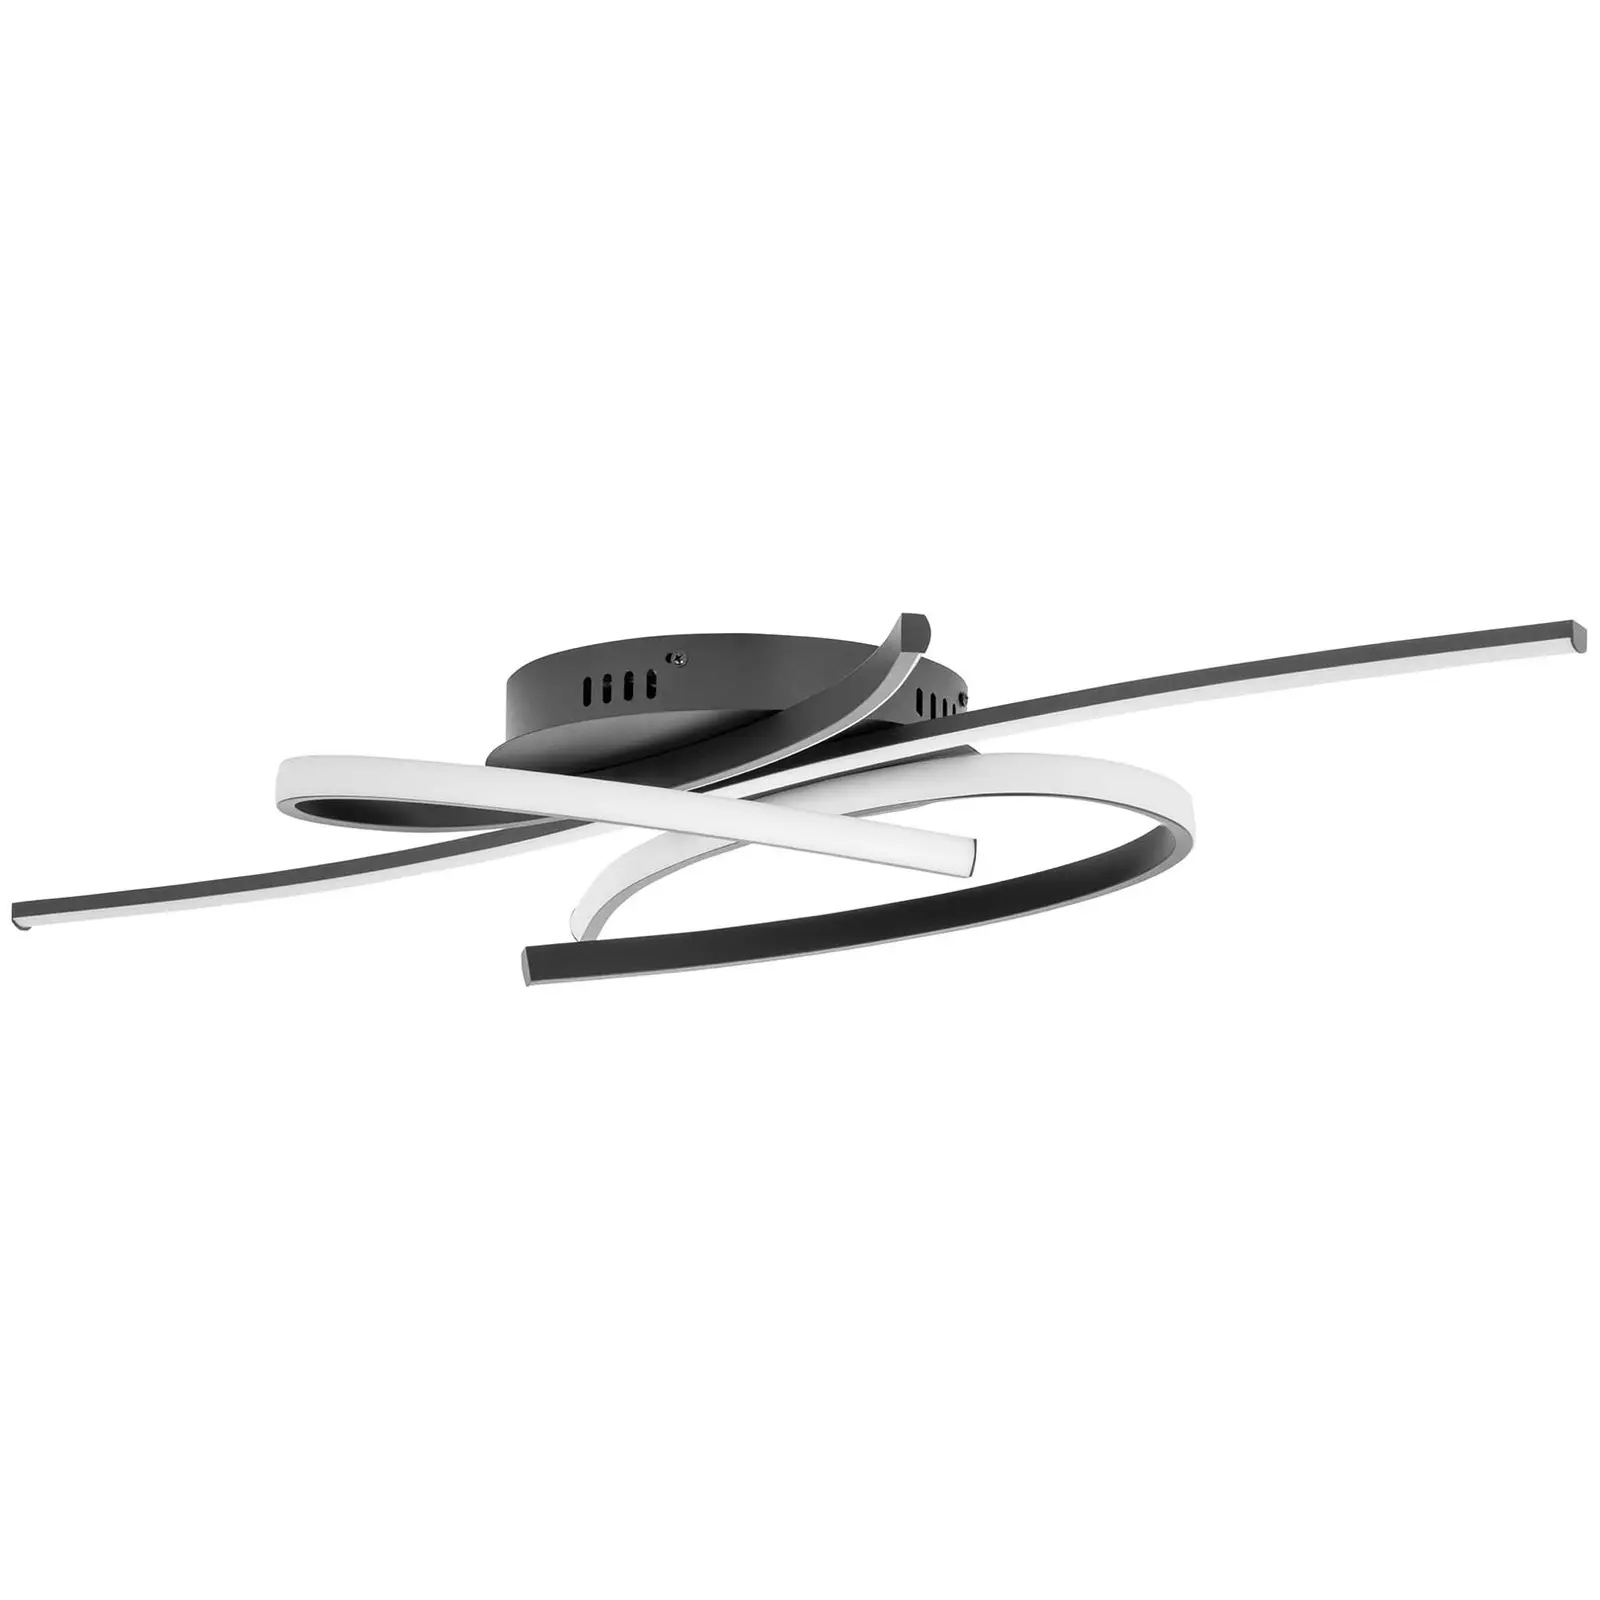 Ceiling Light - 3 intertwined lines - 50 W - remote control